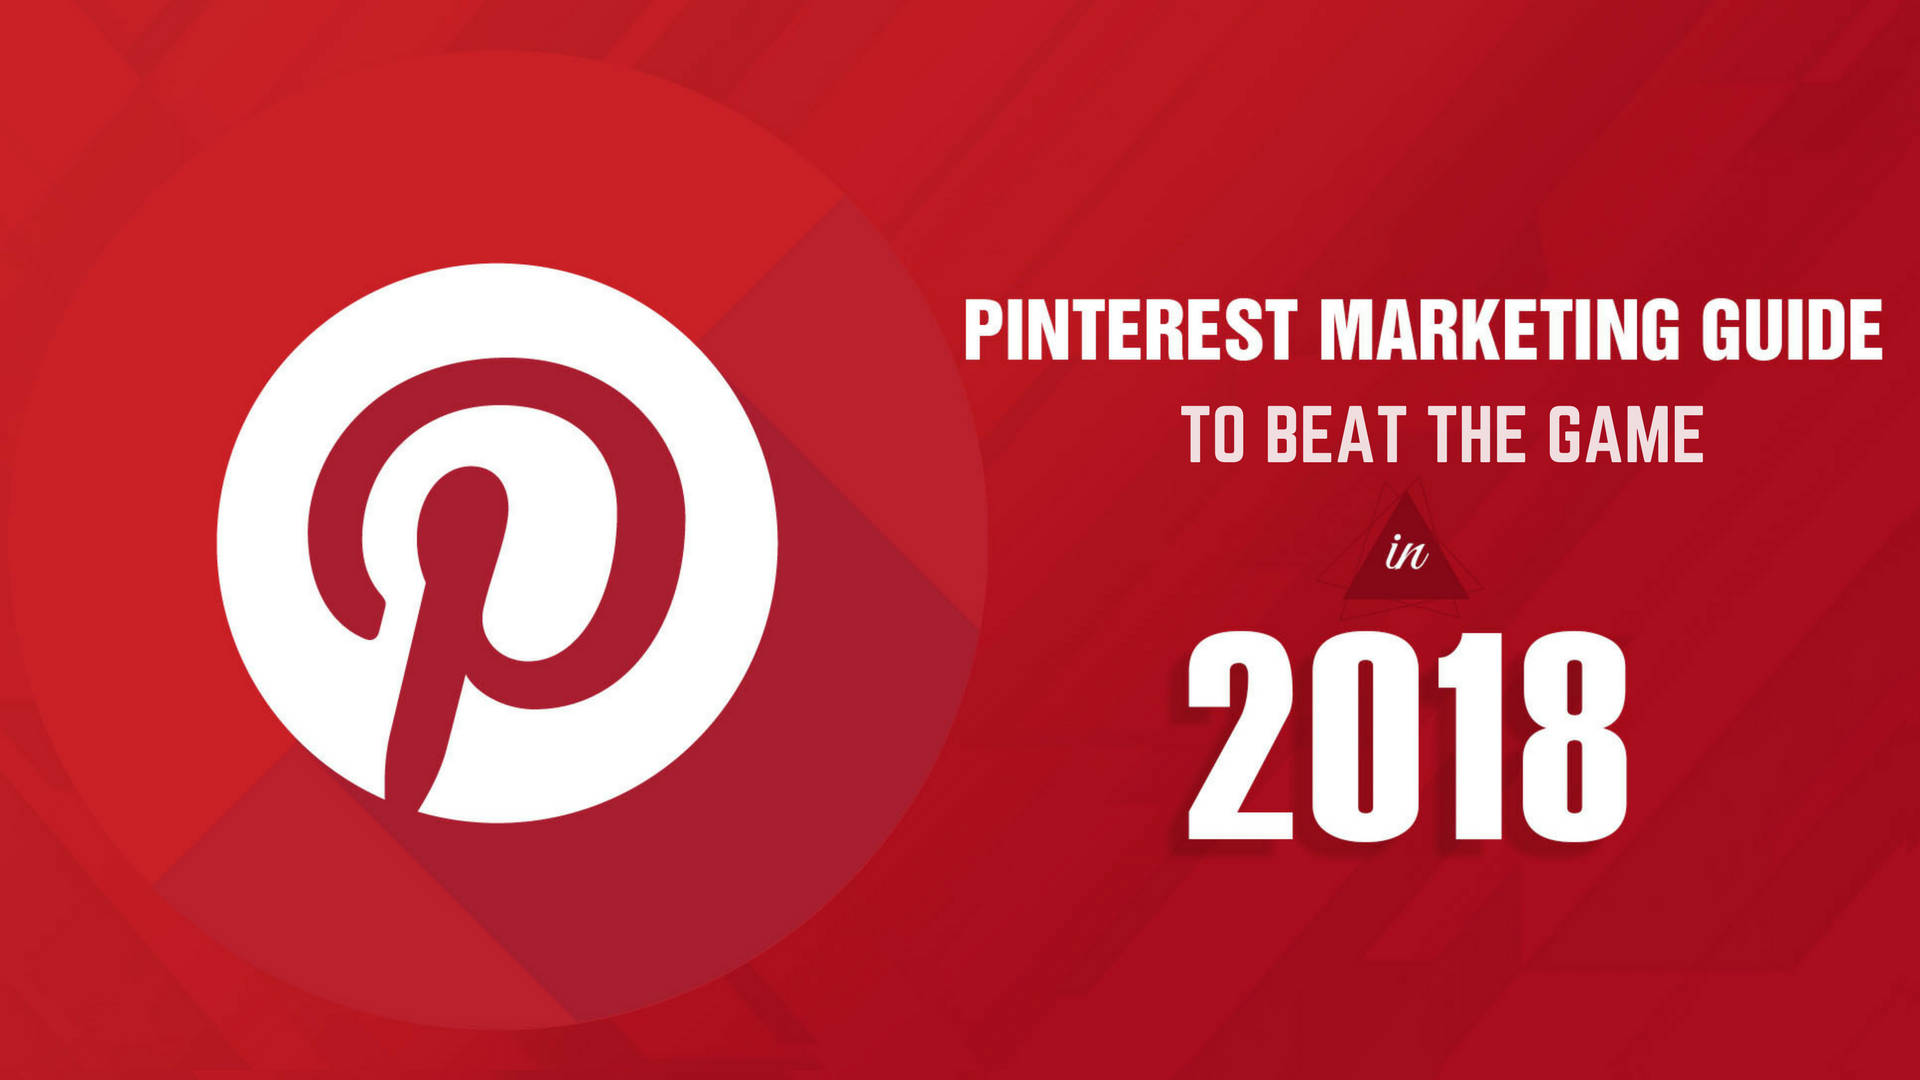 Pinterest Marketing Guide To Beat The Game in 2018